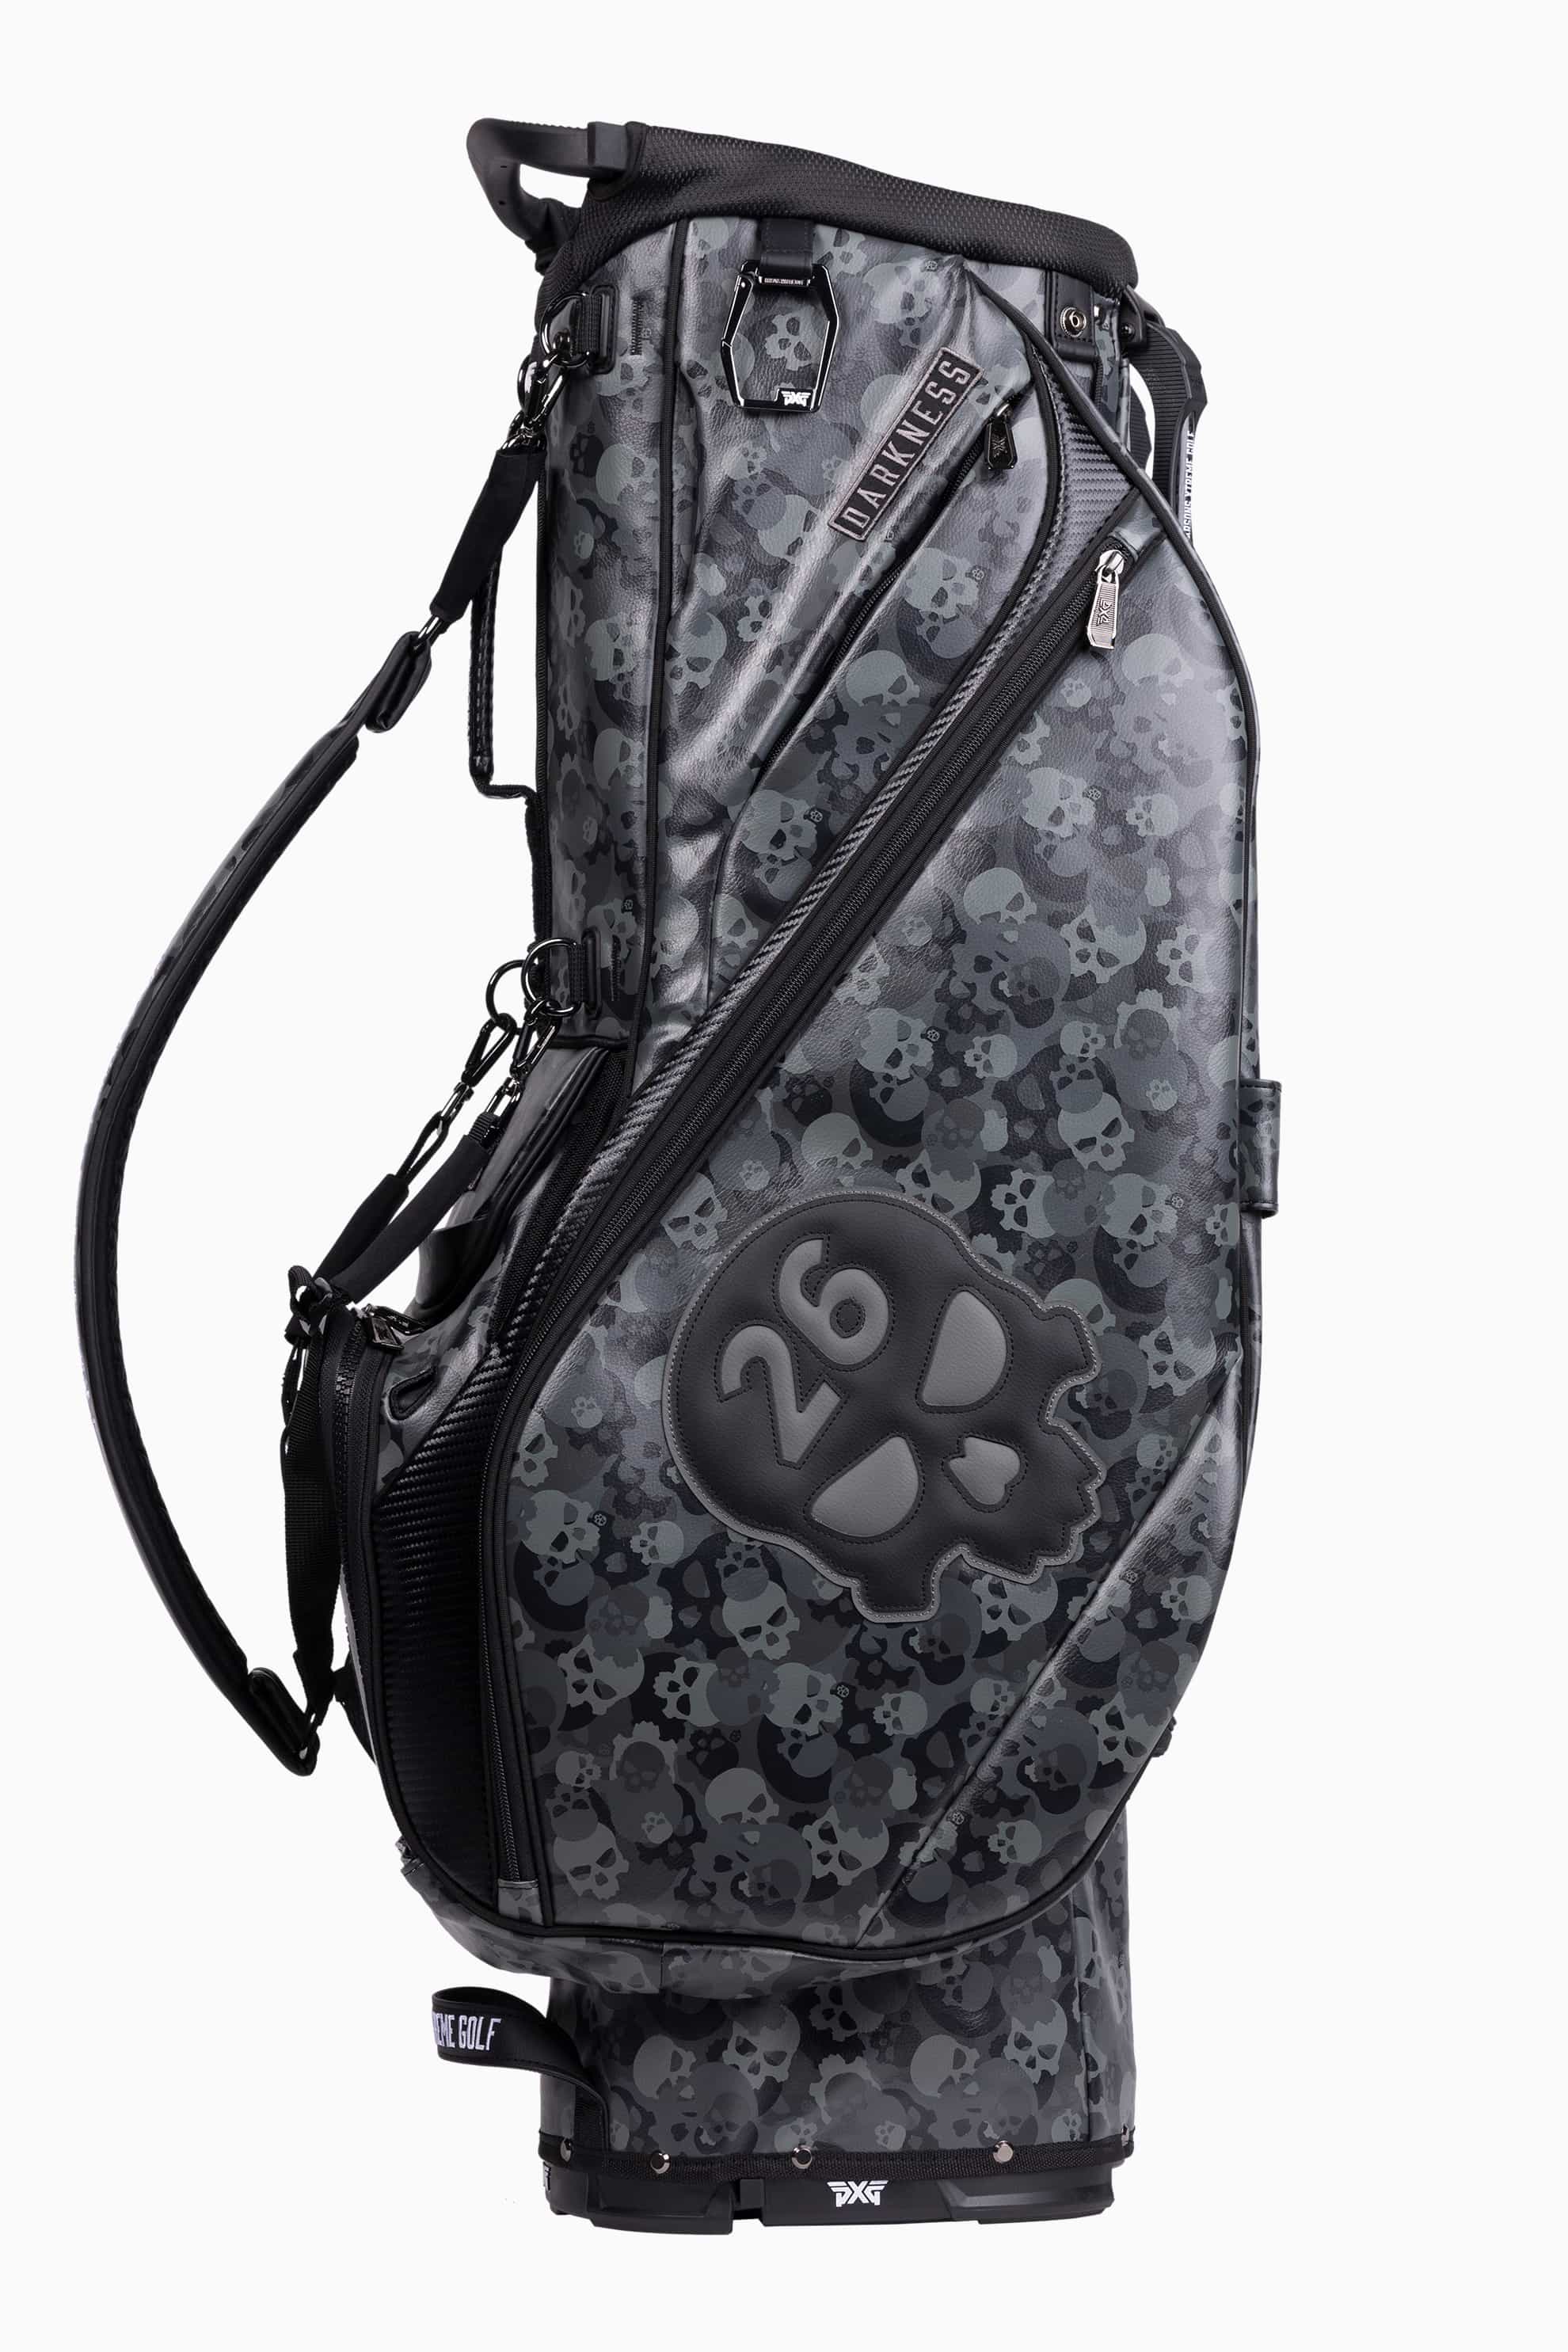 Designer Golf Bags for Ladies - Standing & Cart Bags for Sale from